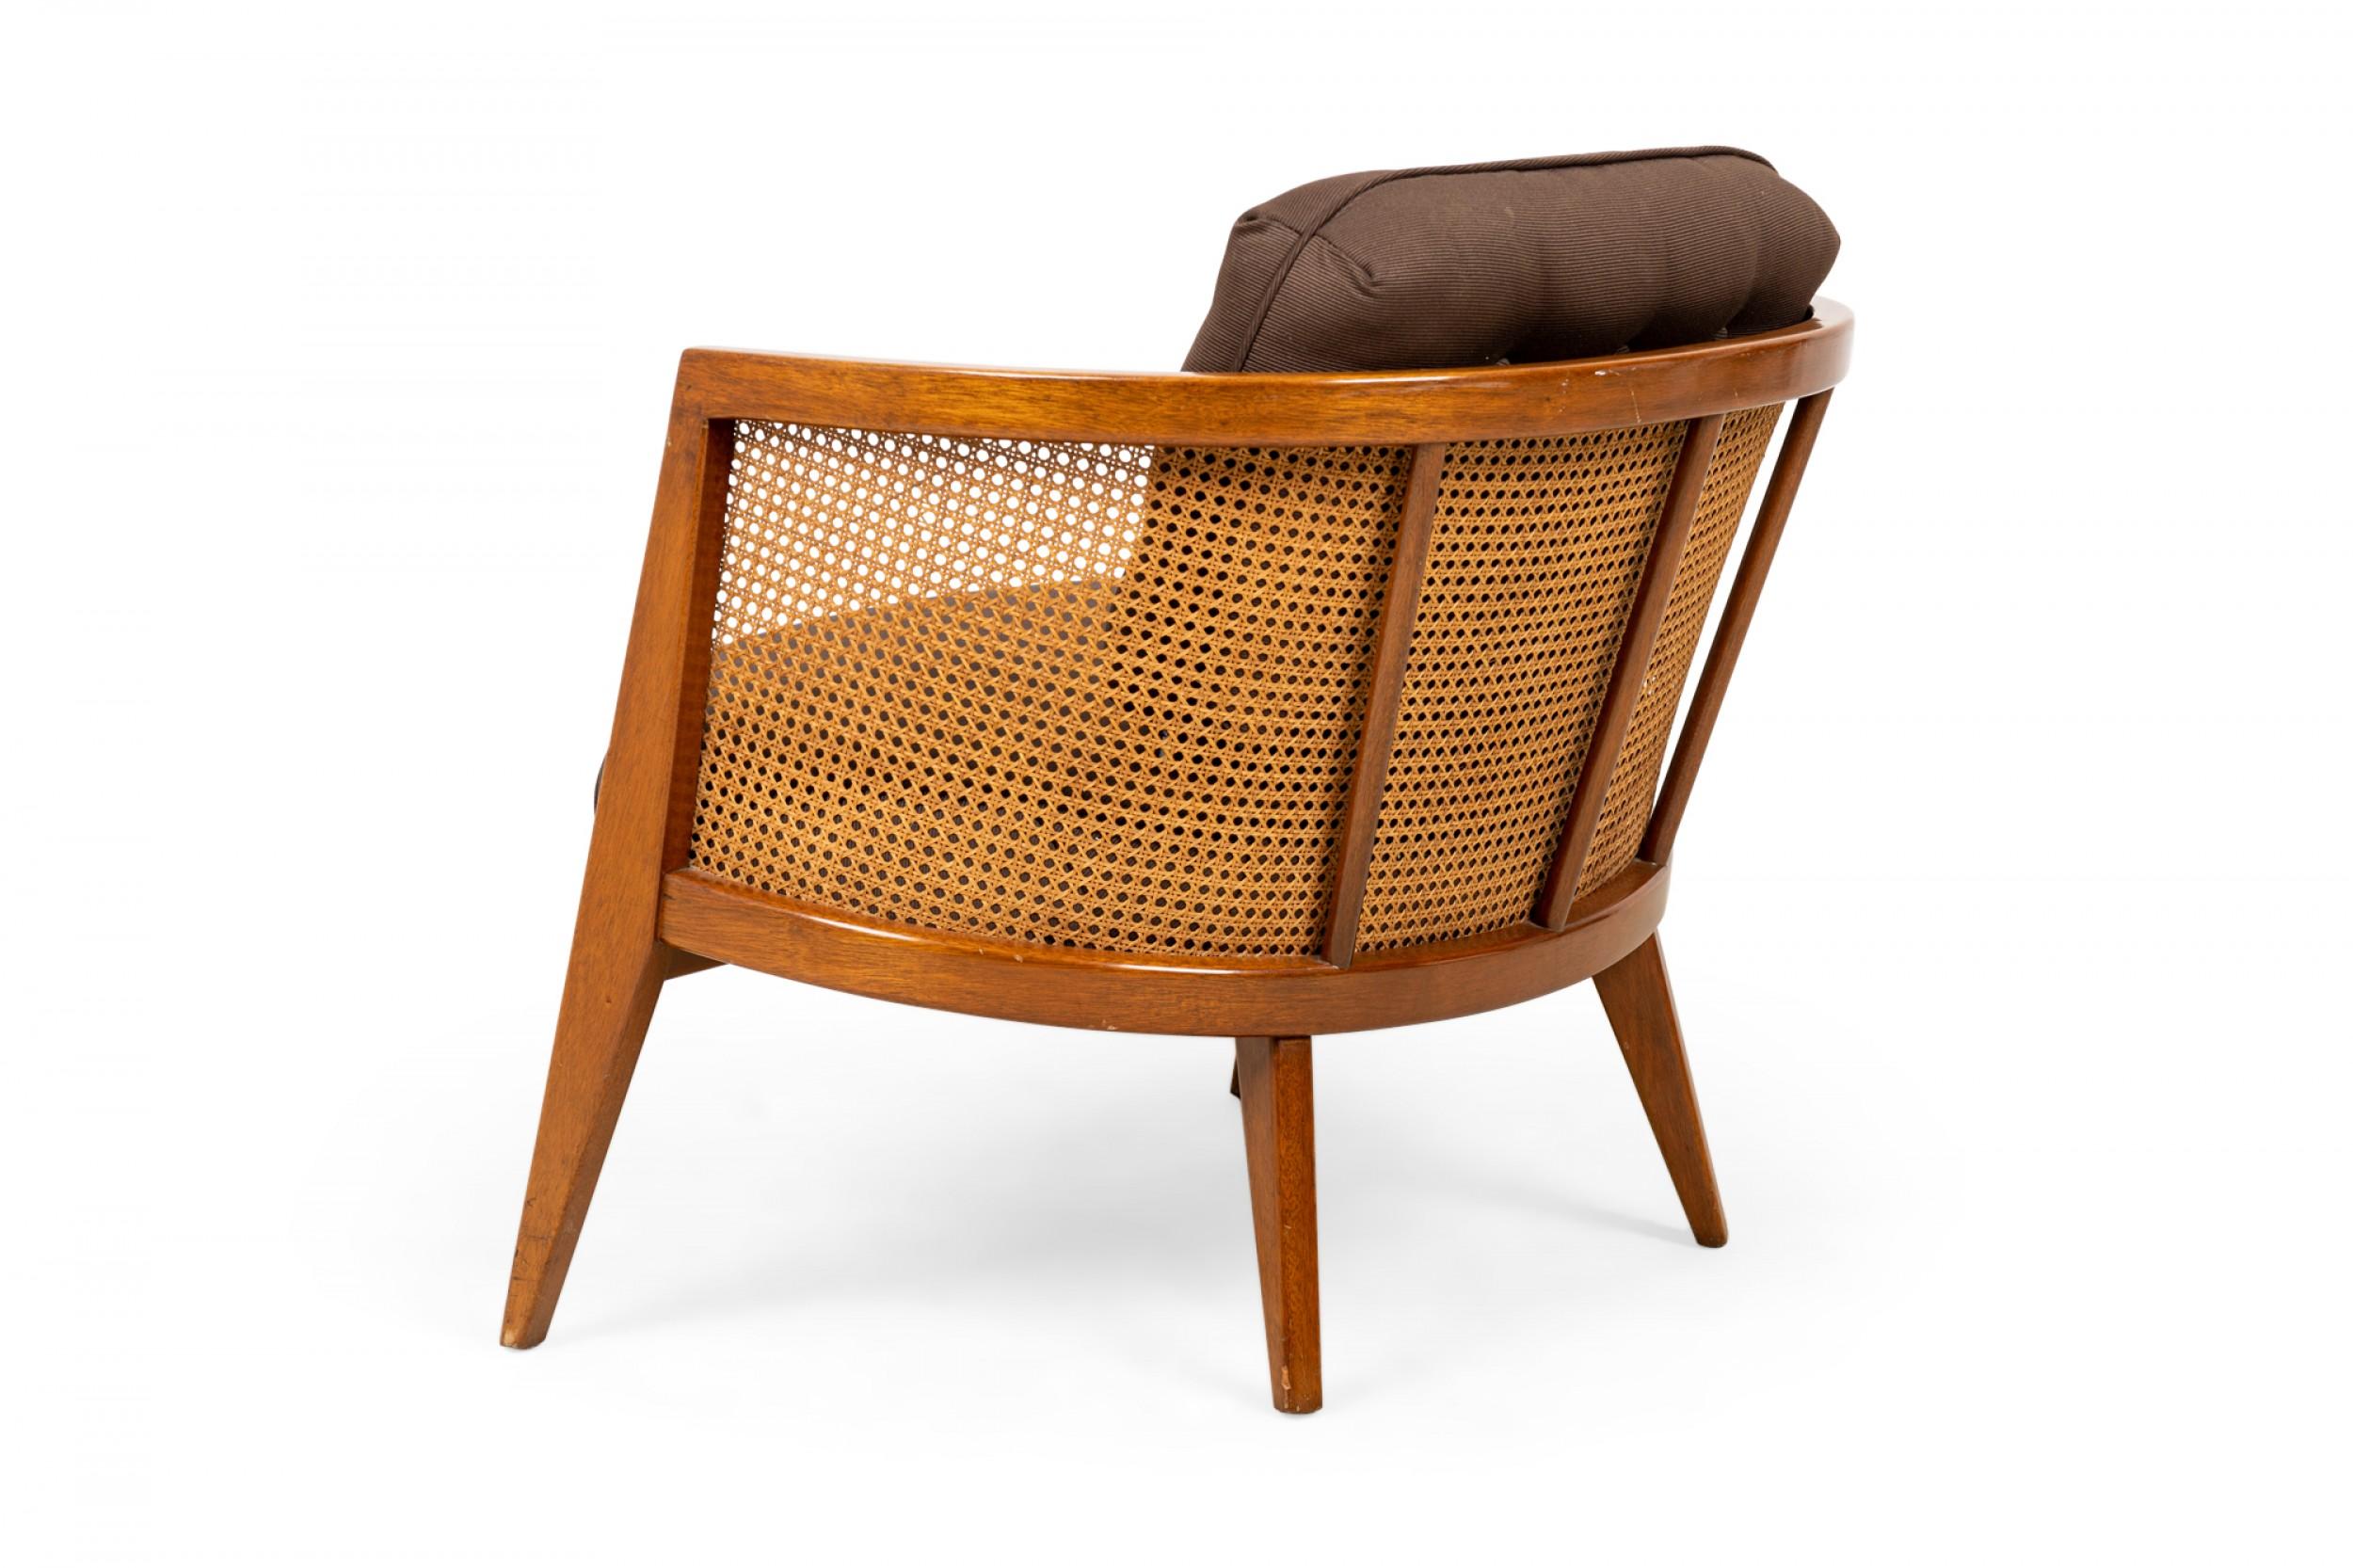 American Harvey Probber Wood, Caning, and Brown Fabric Upholstered Hoop Lounge Chair